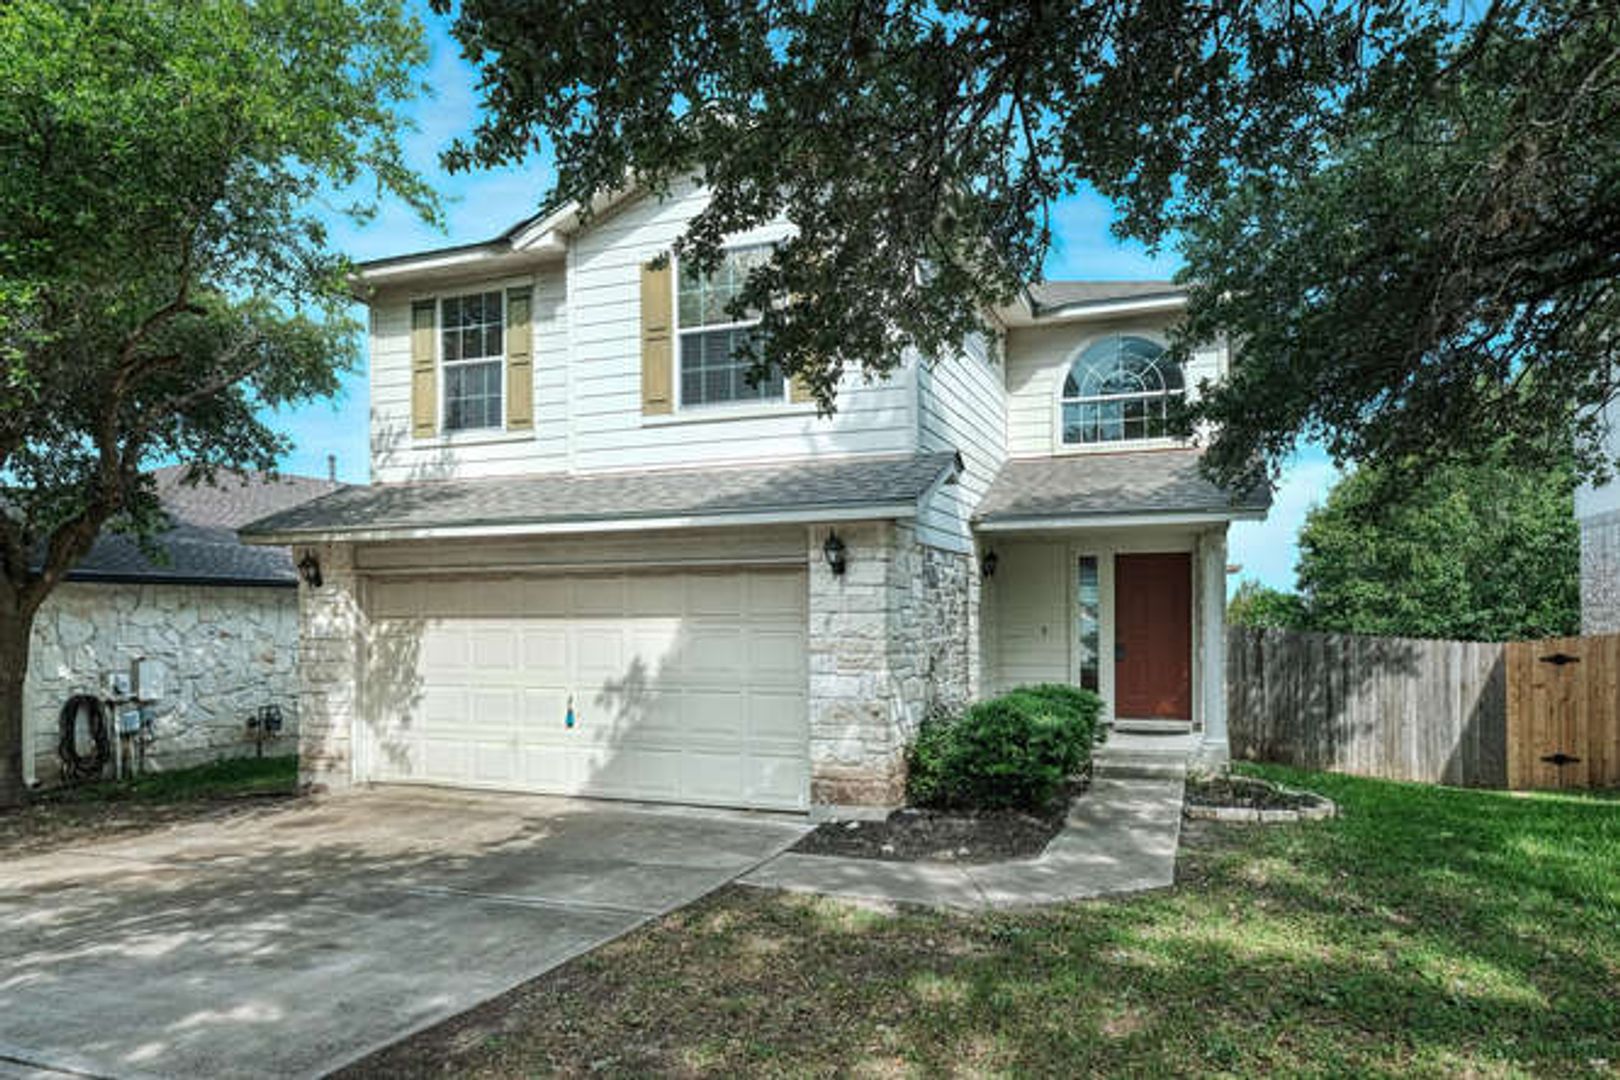 Nice 3B/2.5B two story home in Round Rock Ranch!